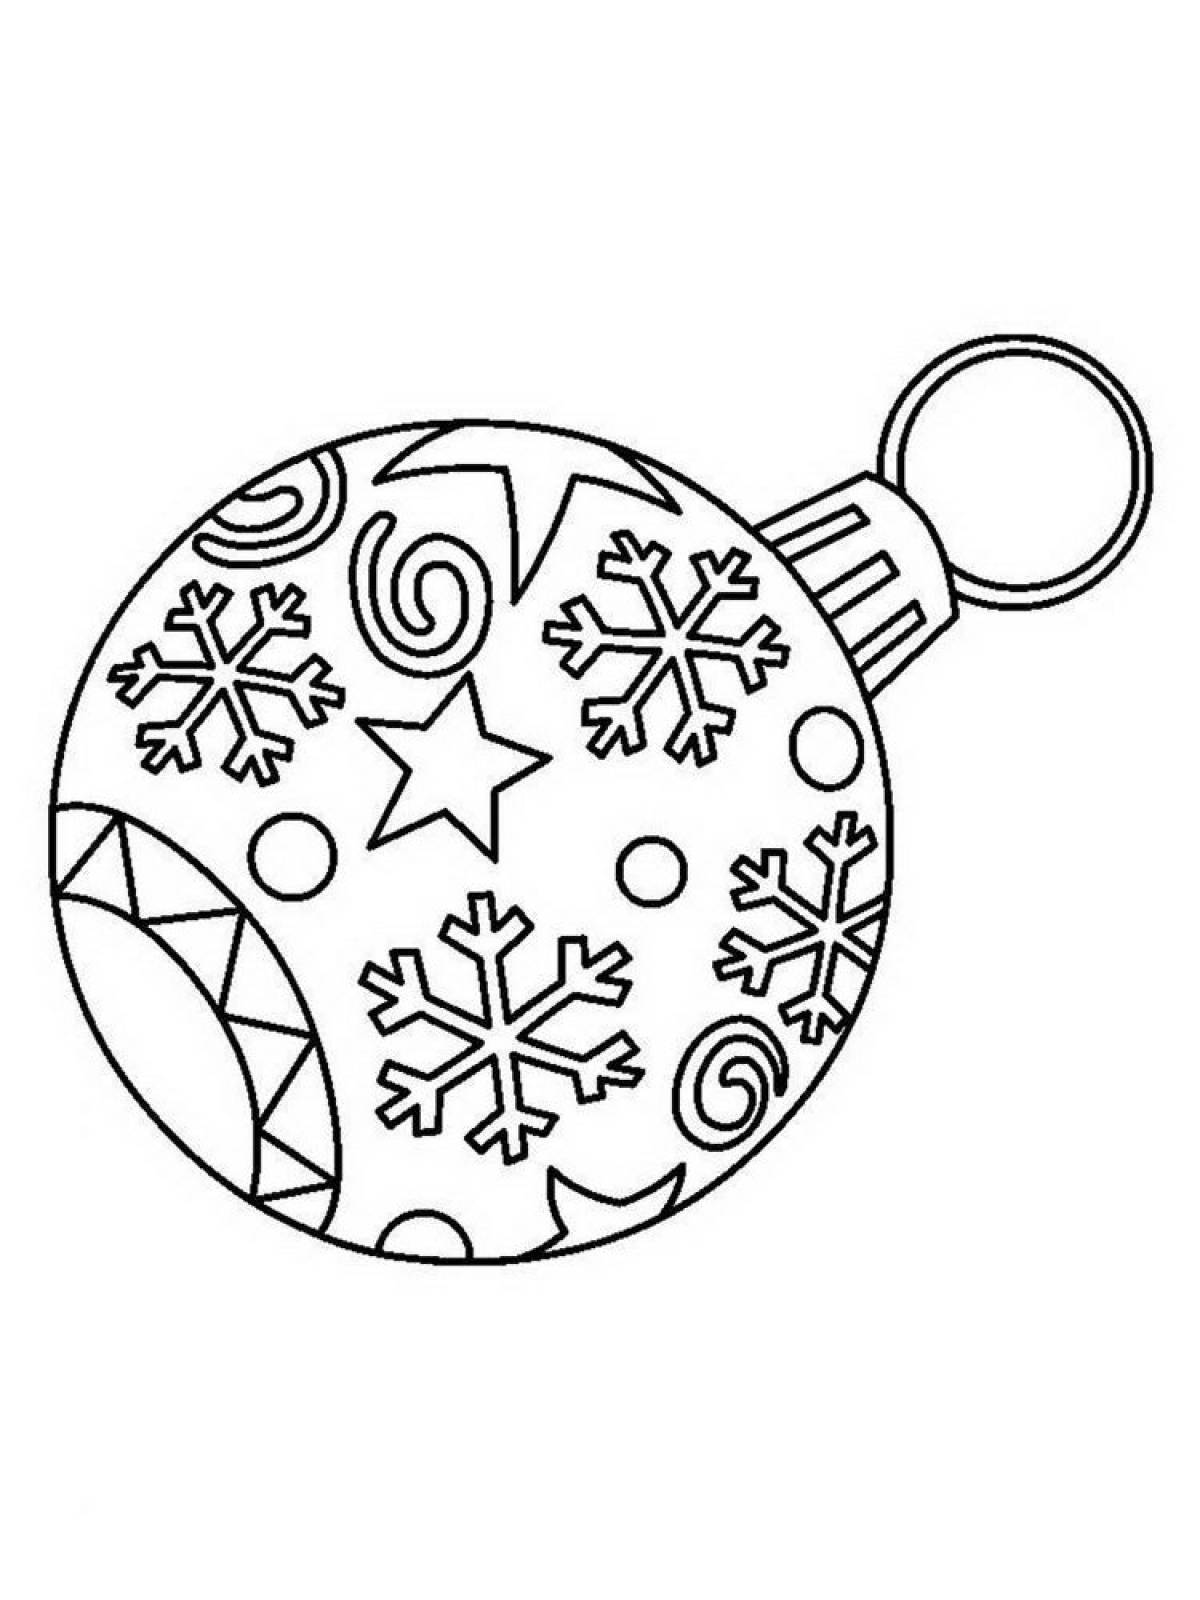 Ball with snowflakes